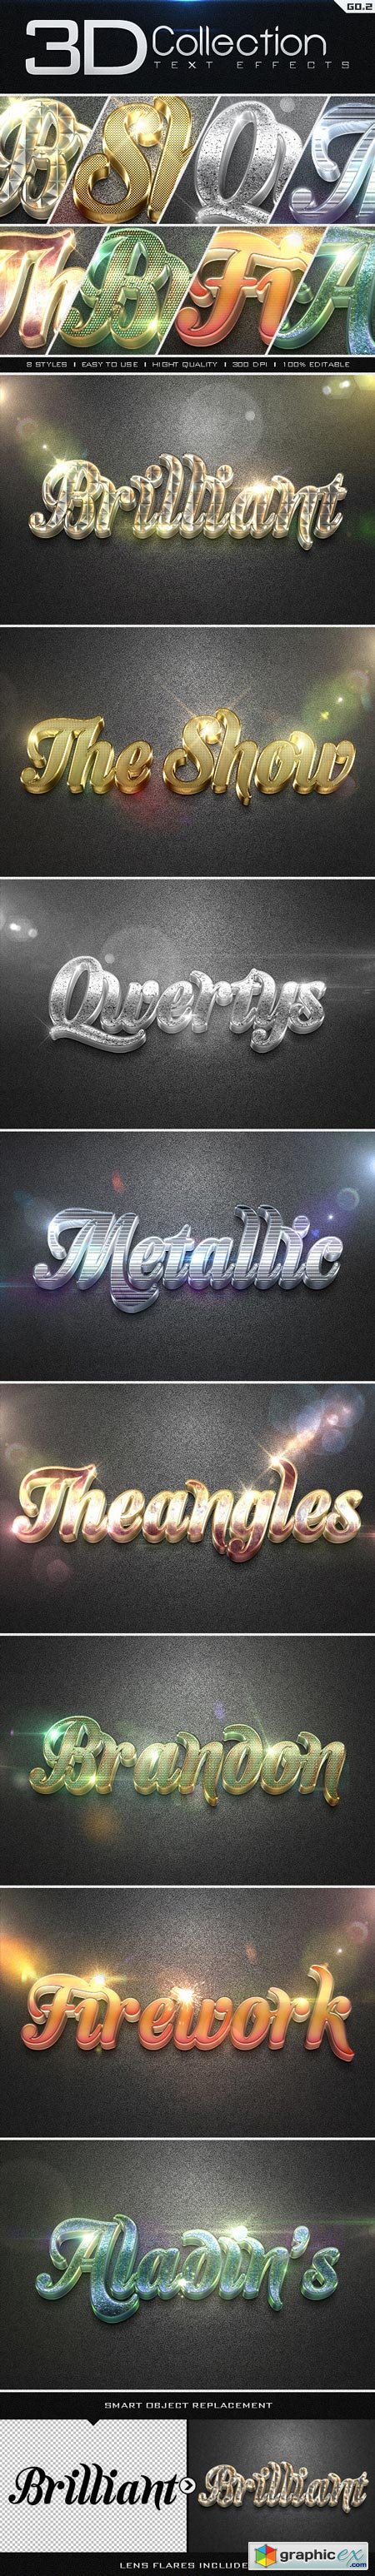 3D Collection Text Effects GO.2